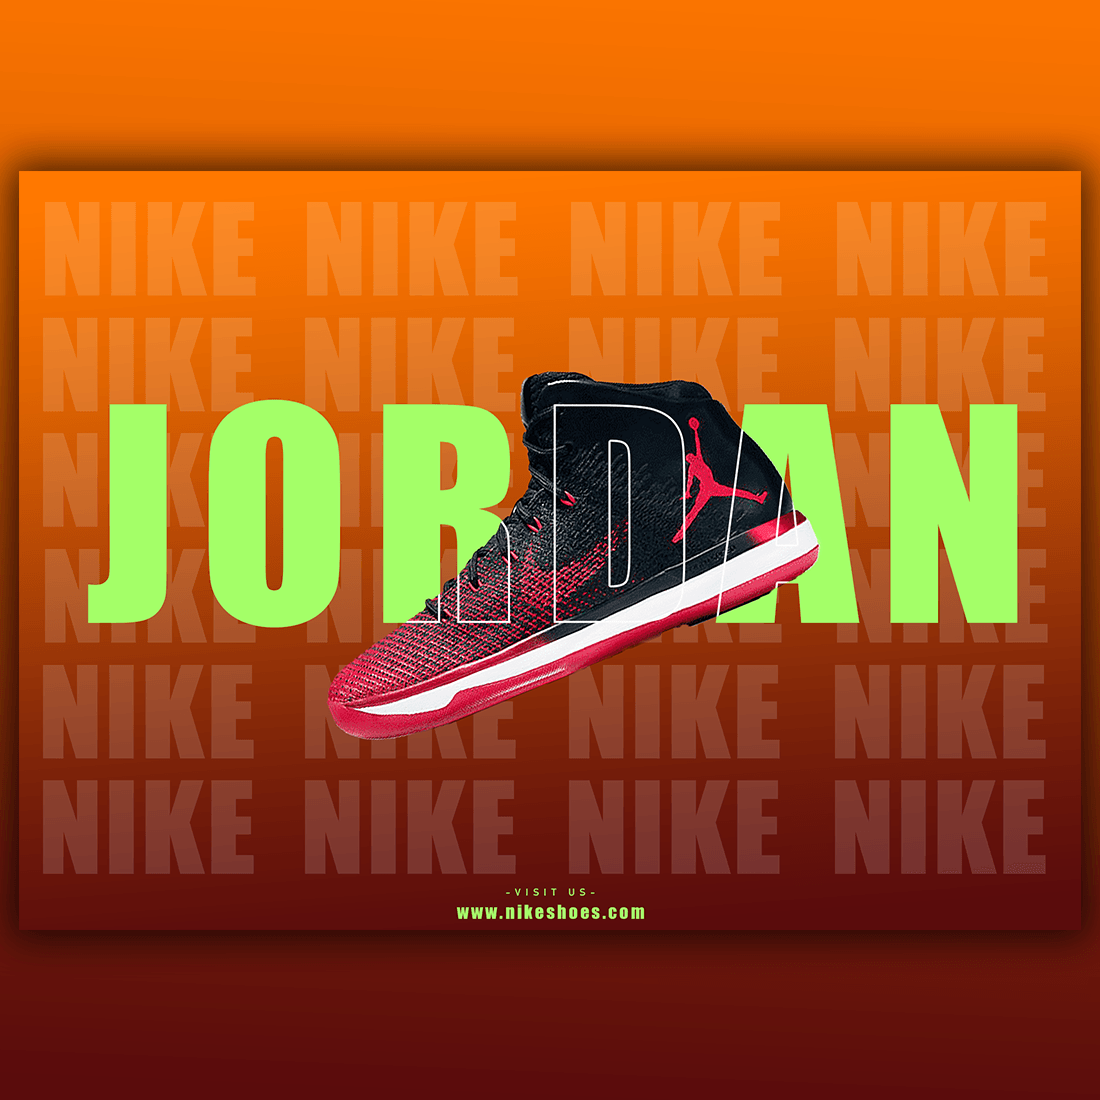 Nike Shoe Poster and Social Media Banner preview image.